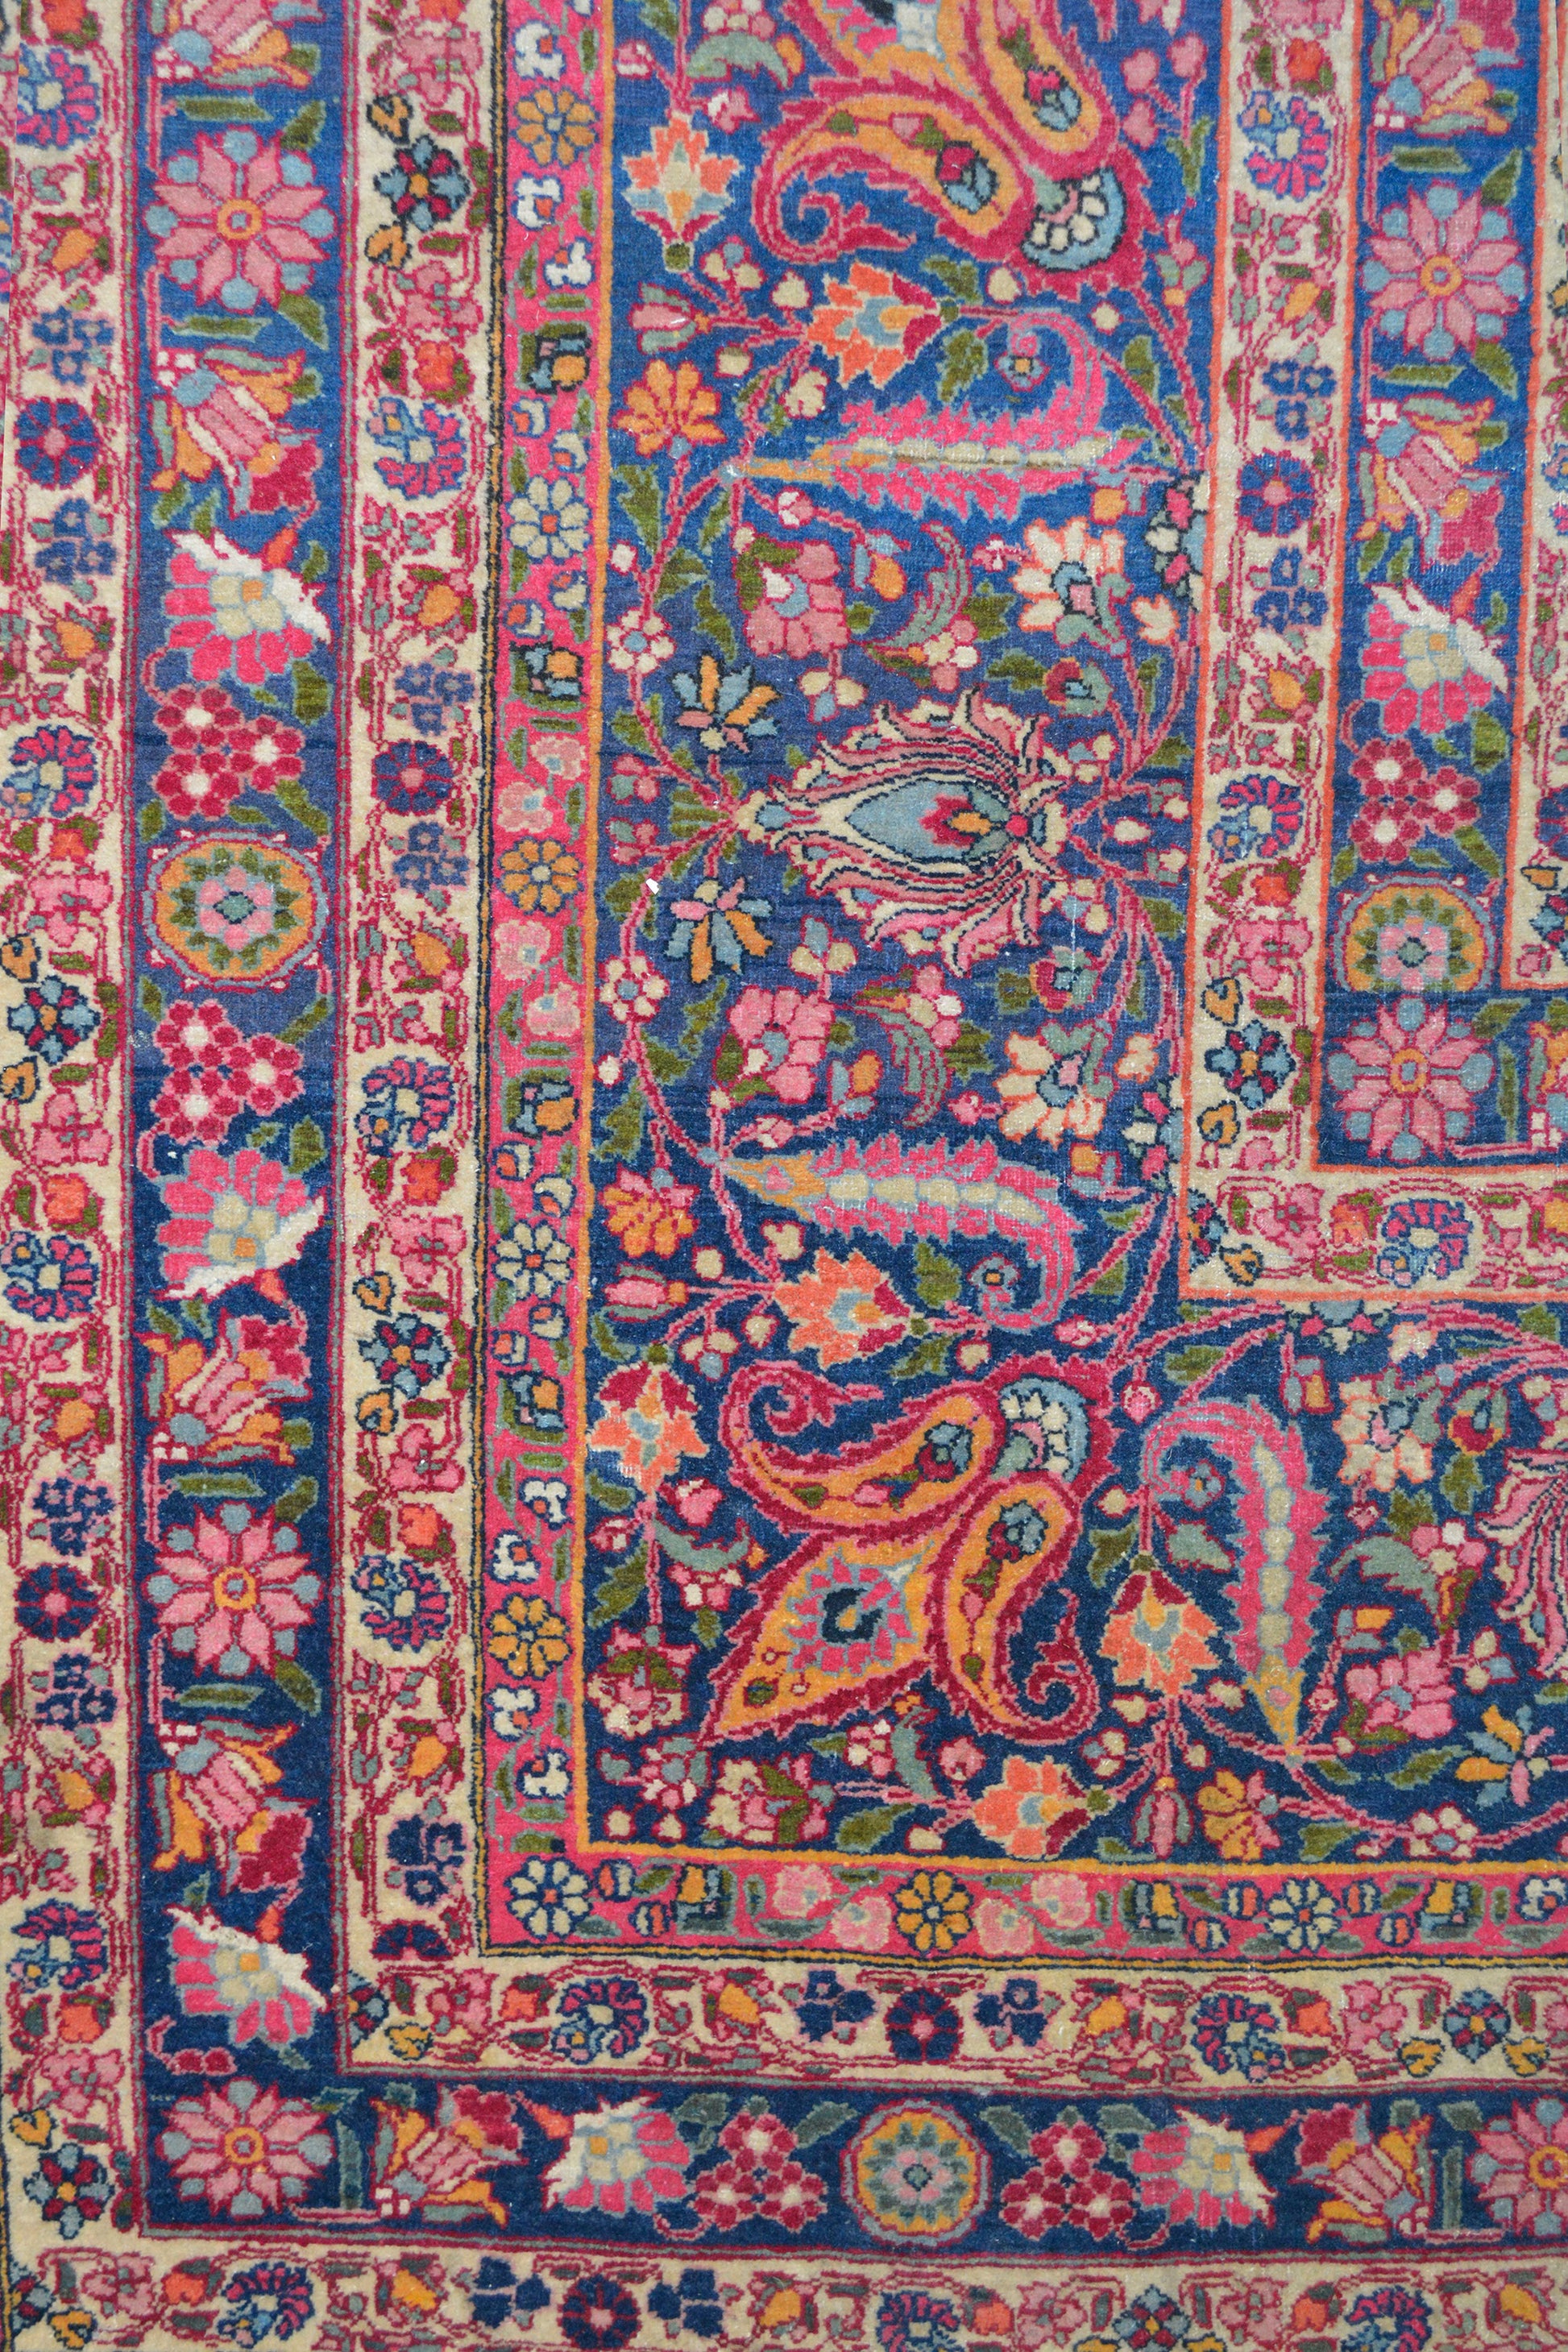 Also, this carpet has ten frames around it. The left bottom corner shows frames with a flowers pattern inside. The color scheme is royal blue, pink, fuchsia, white, yellow, and cyan. 